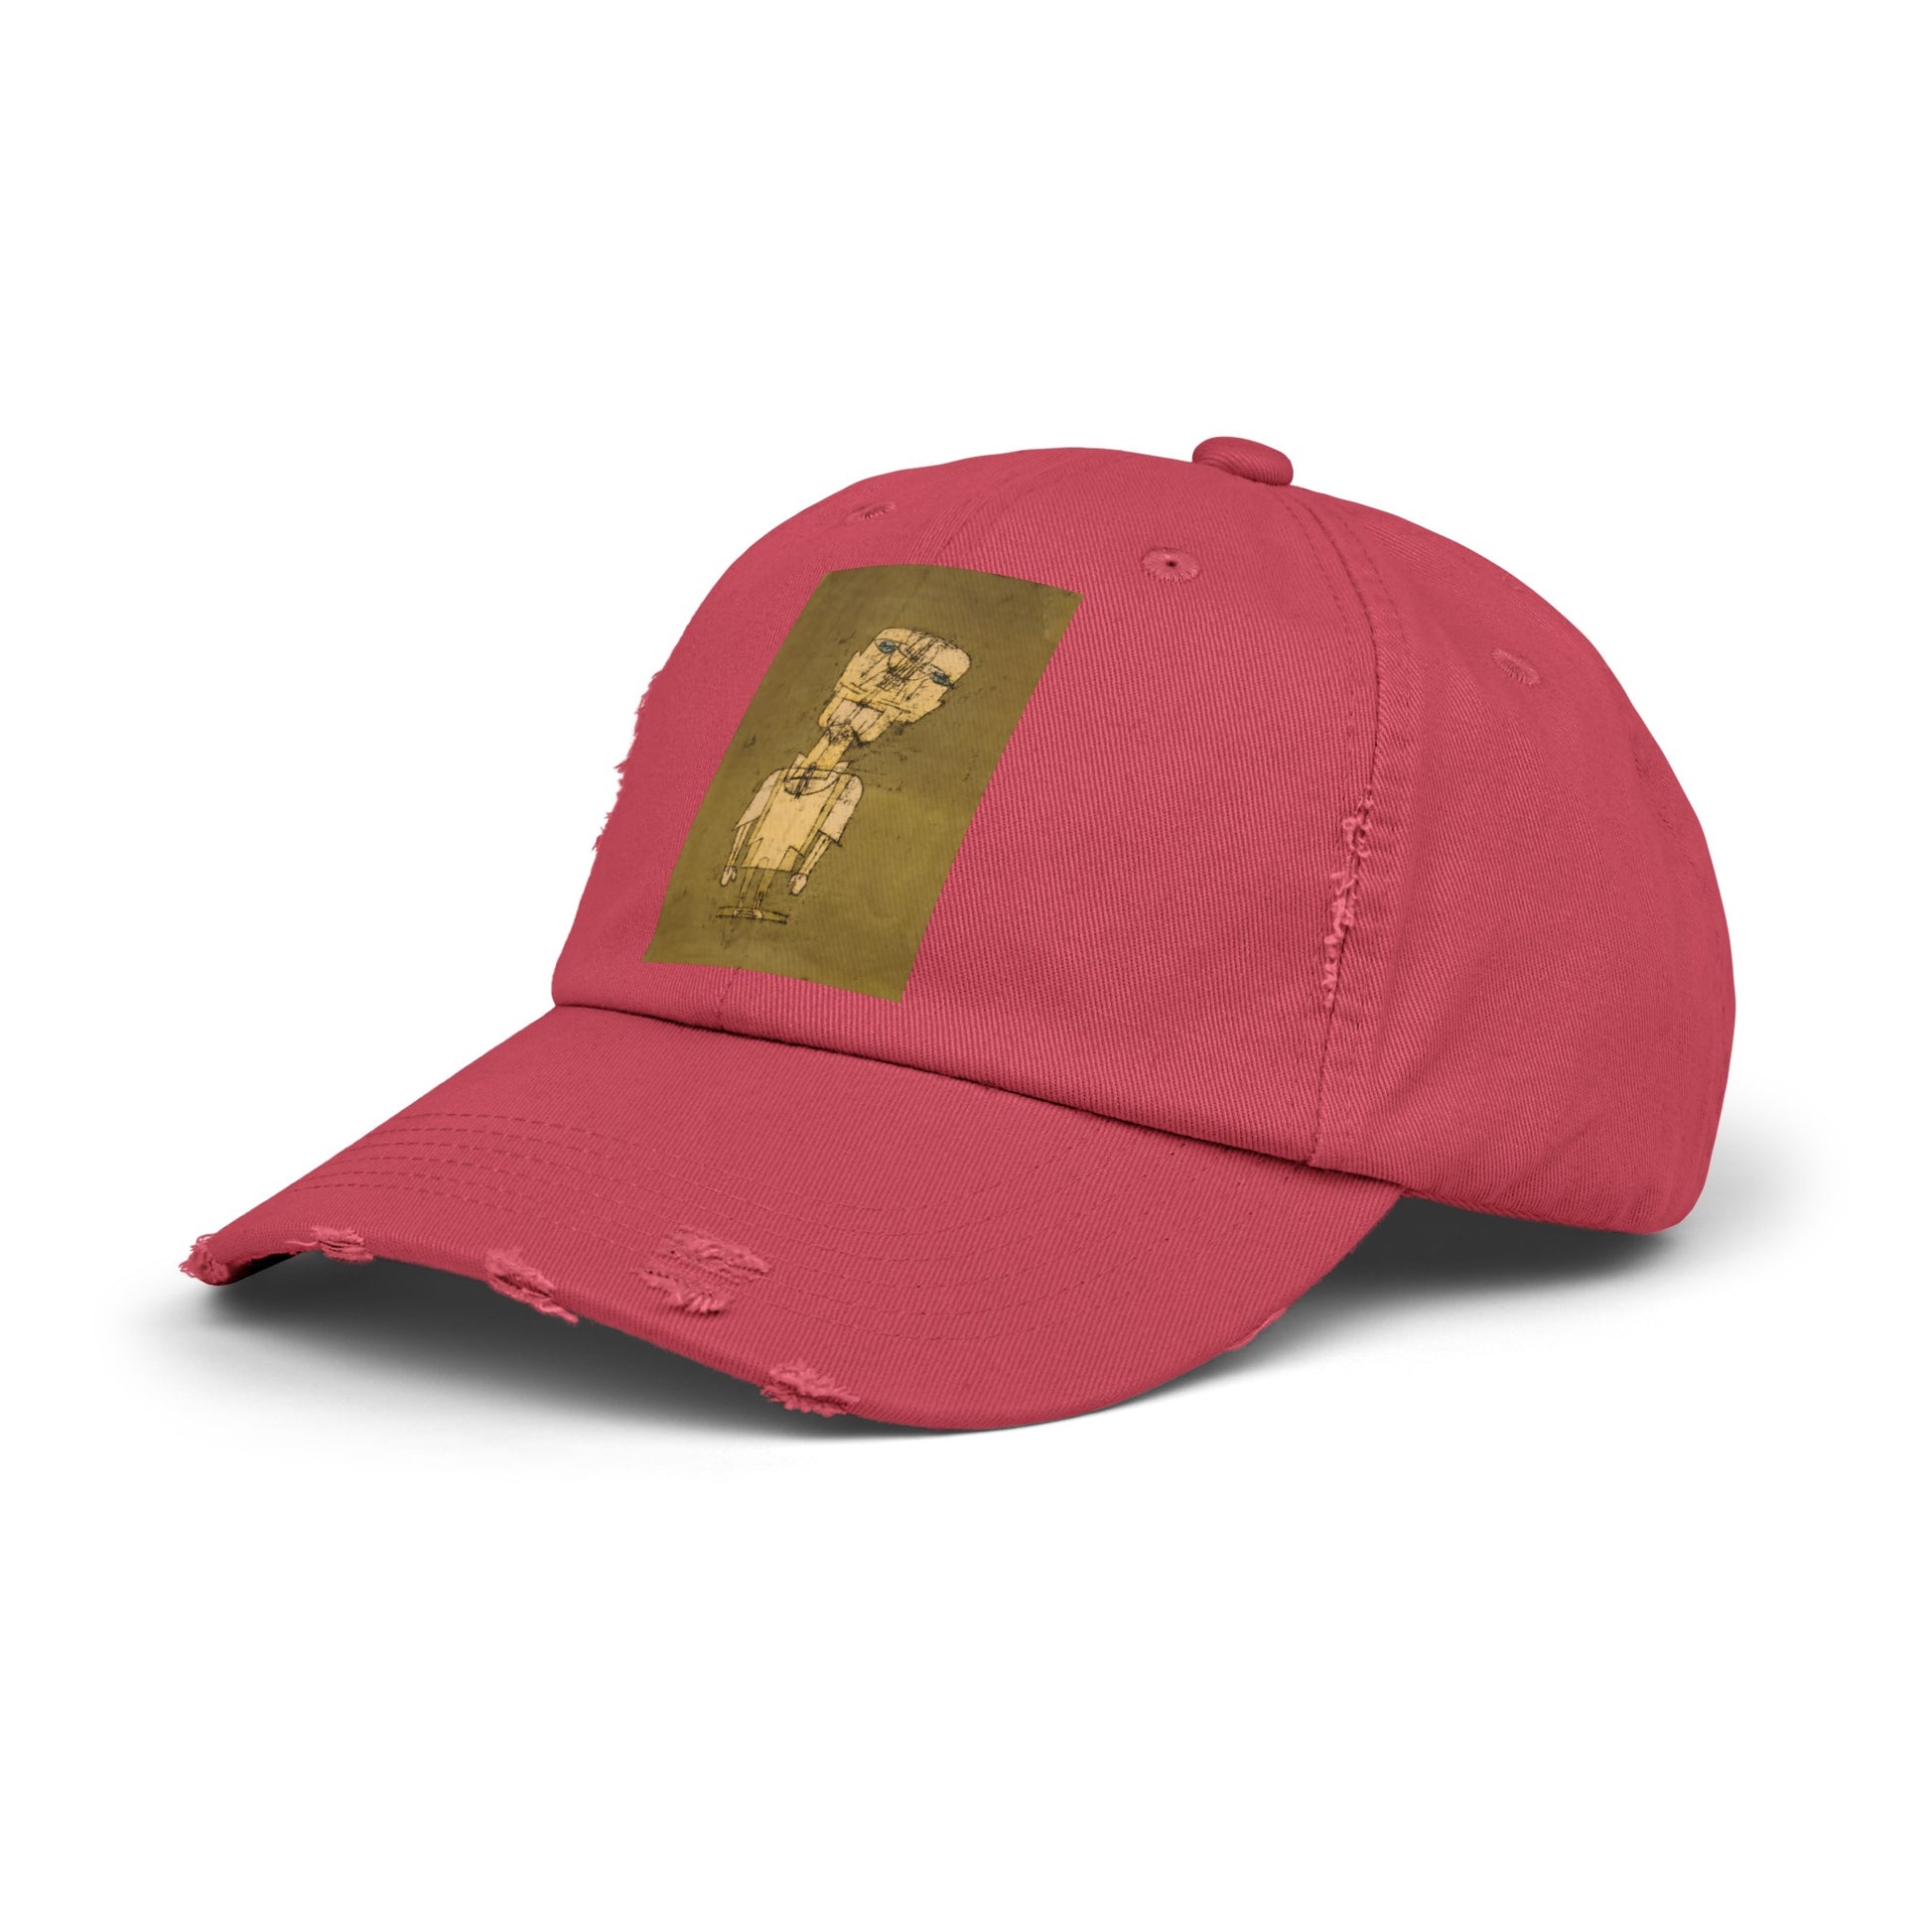 a red hat with a picture of a woman on it